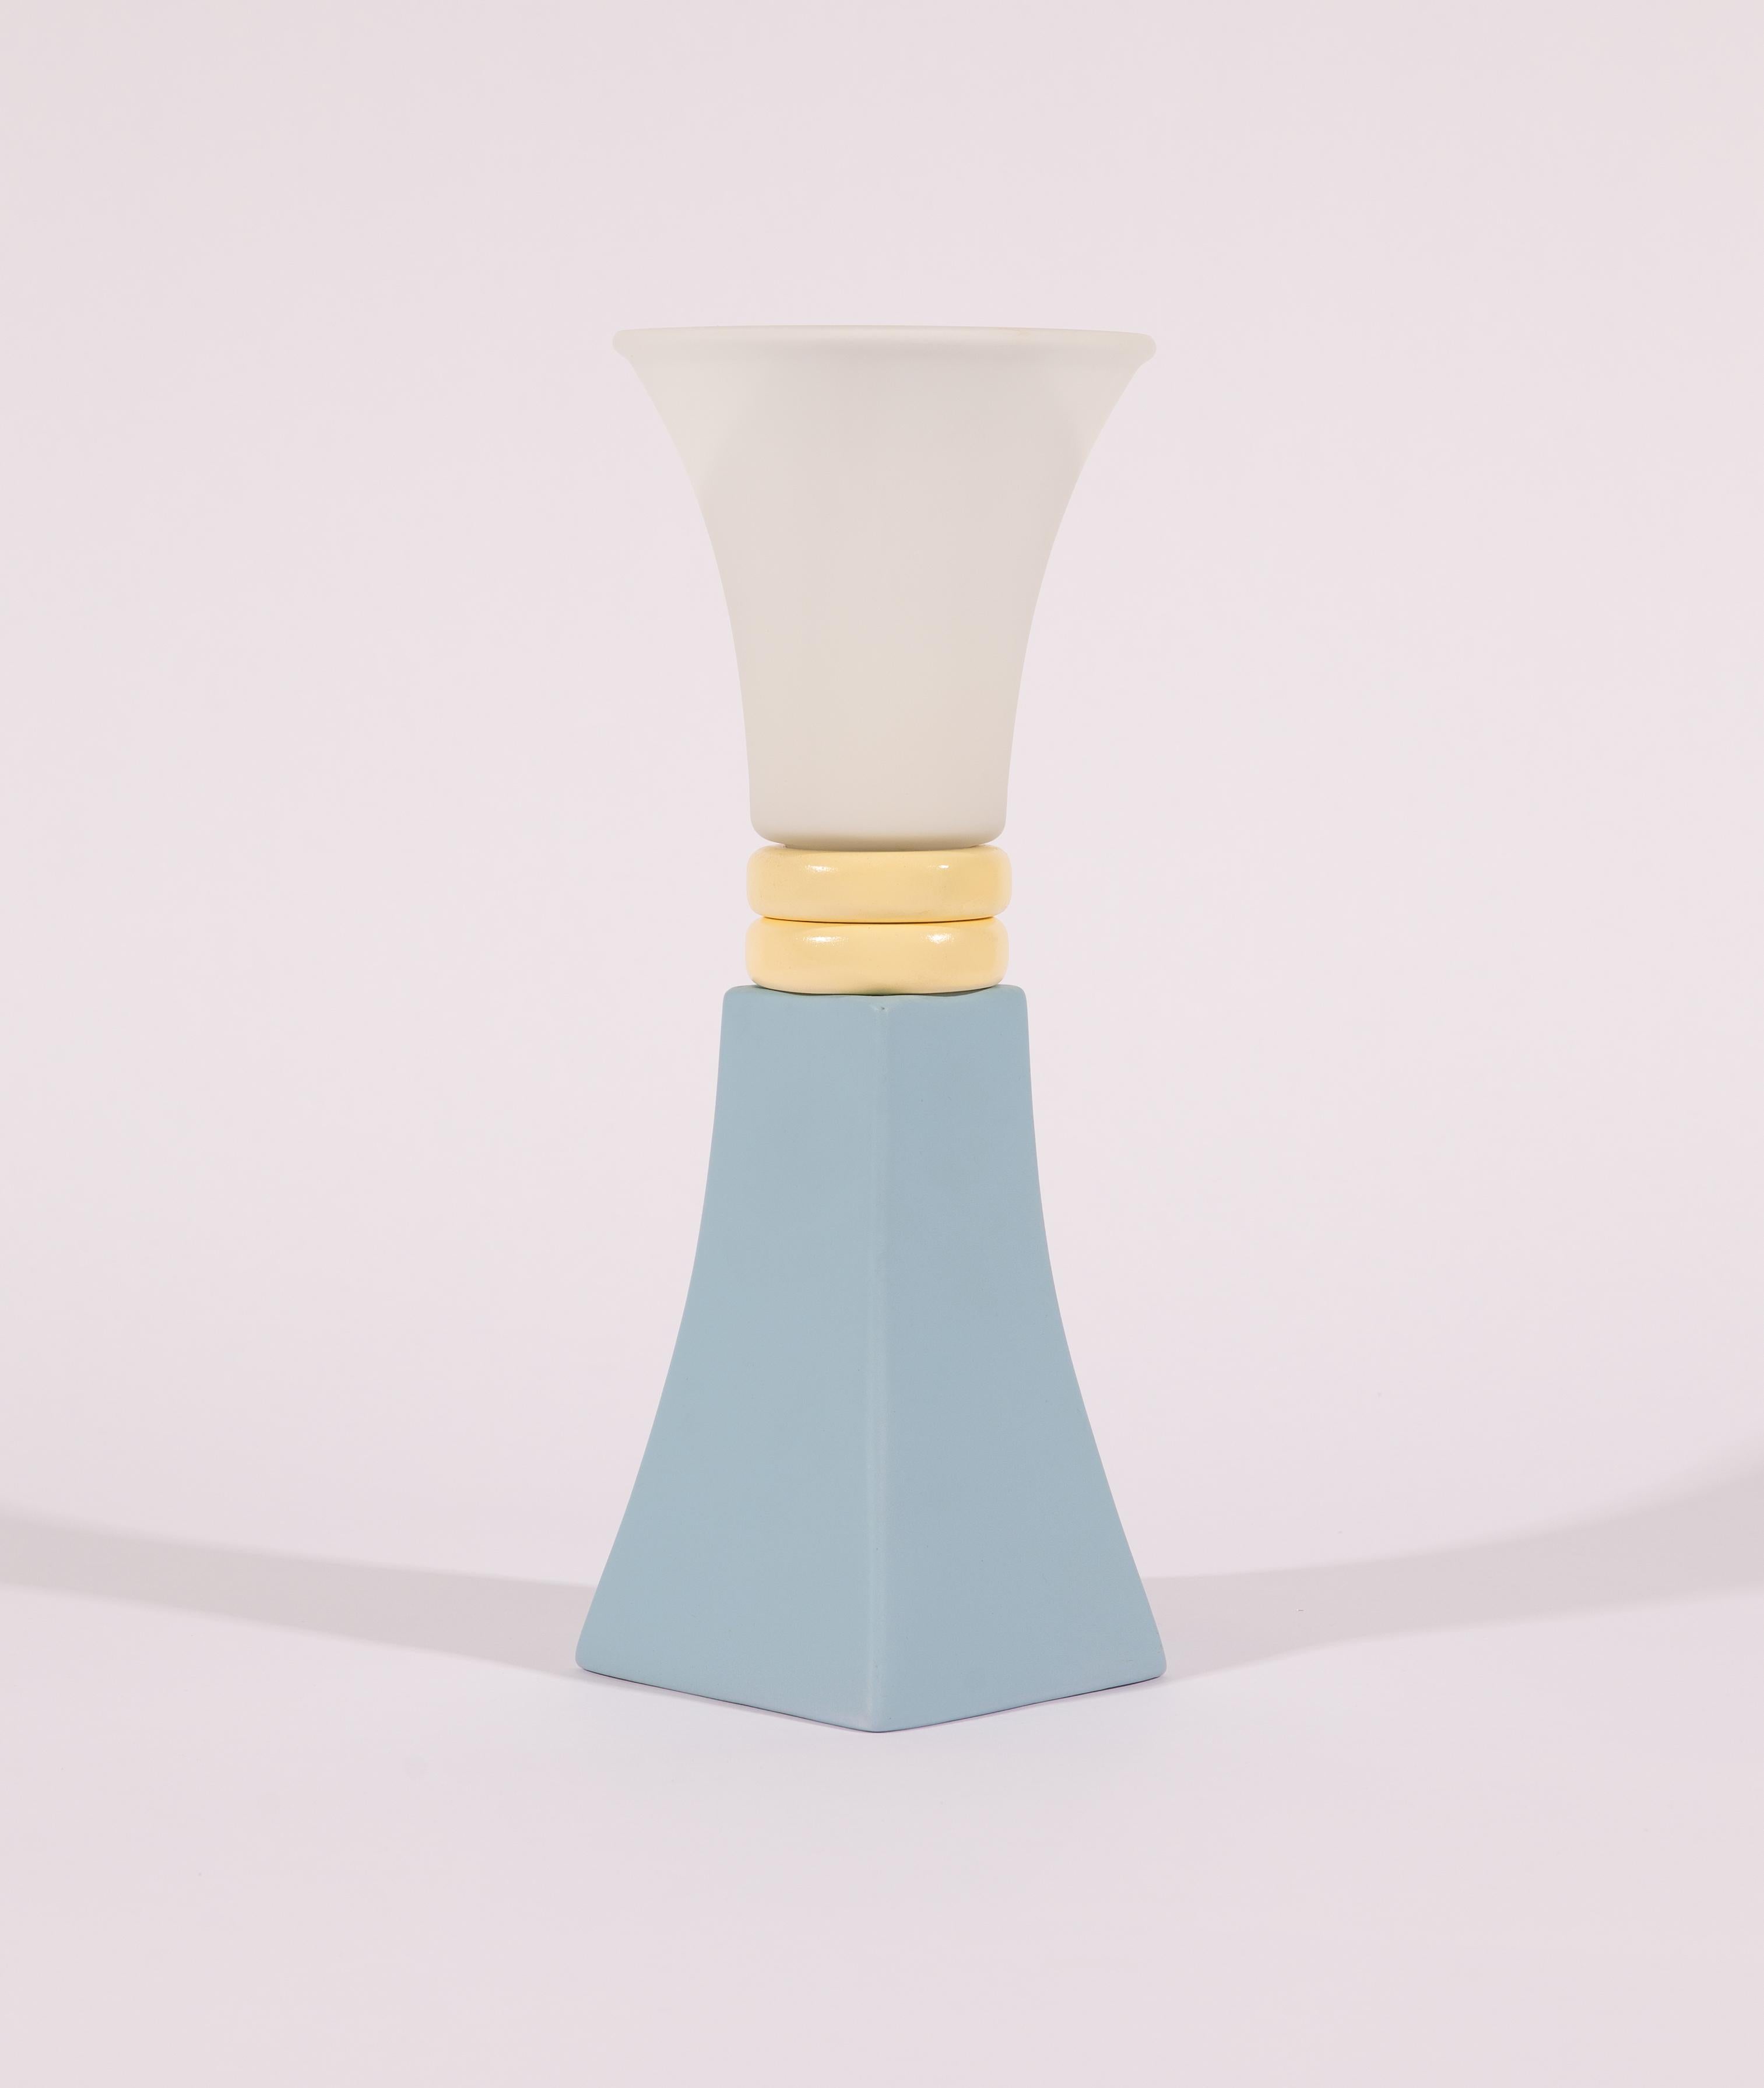 The “Pale Morning/ 7am” lamp is a handcrafted, one-of-a-kind piece made from the white vintage glass shade, light blue ceramic element, and painted wooden elements. Its pastel color palette, soft light from a 15W iridescent bulb, and curved lines